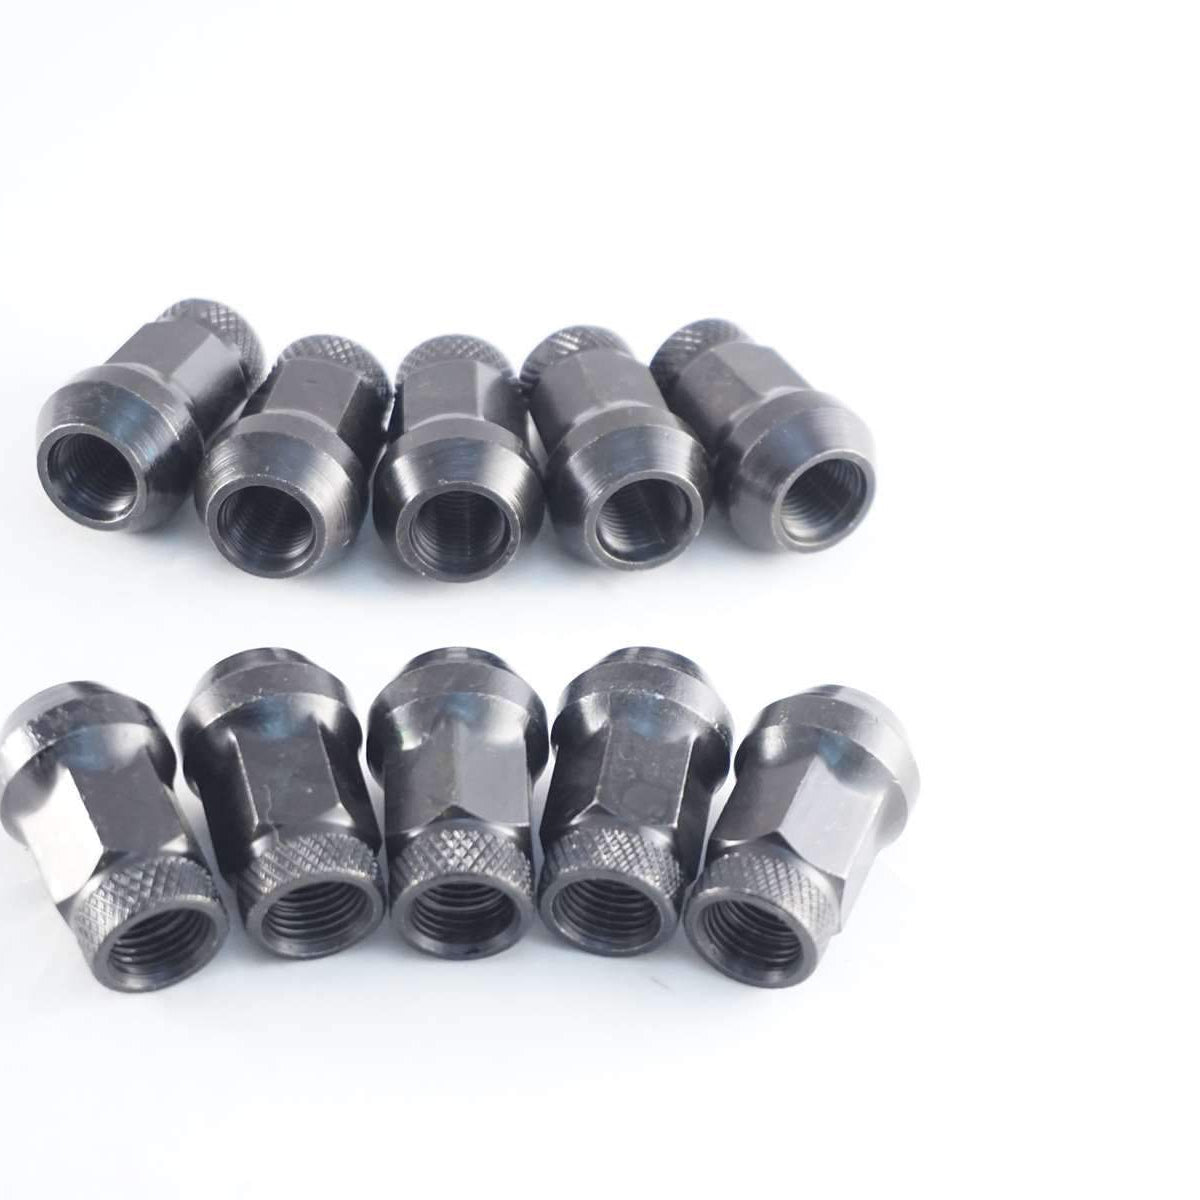 Lug Nut - Open ended - M14x1.5